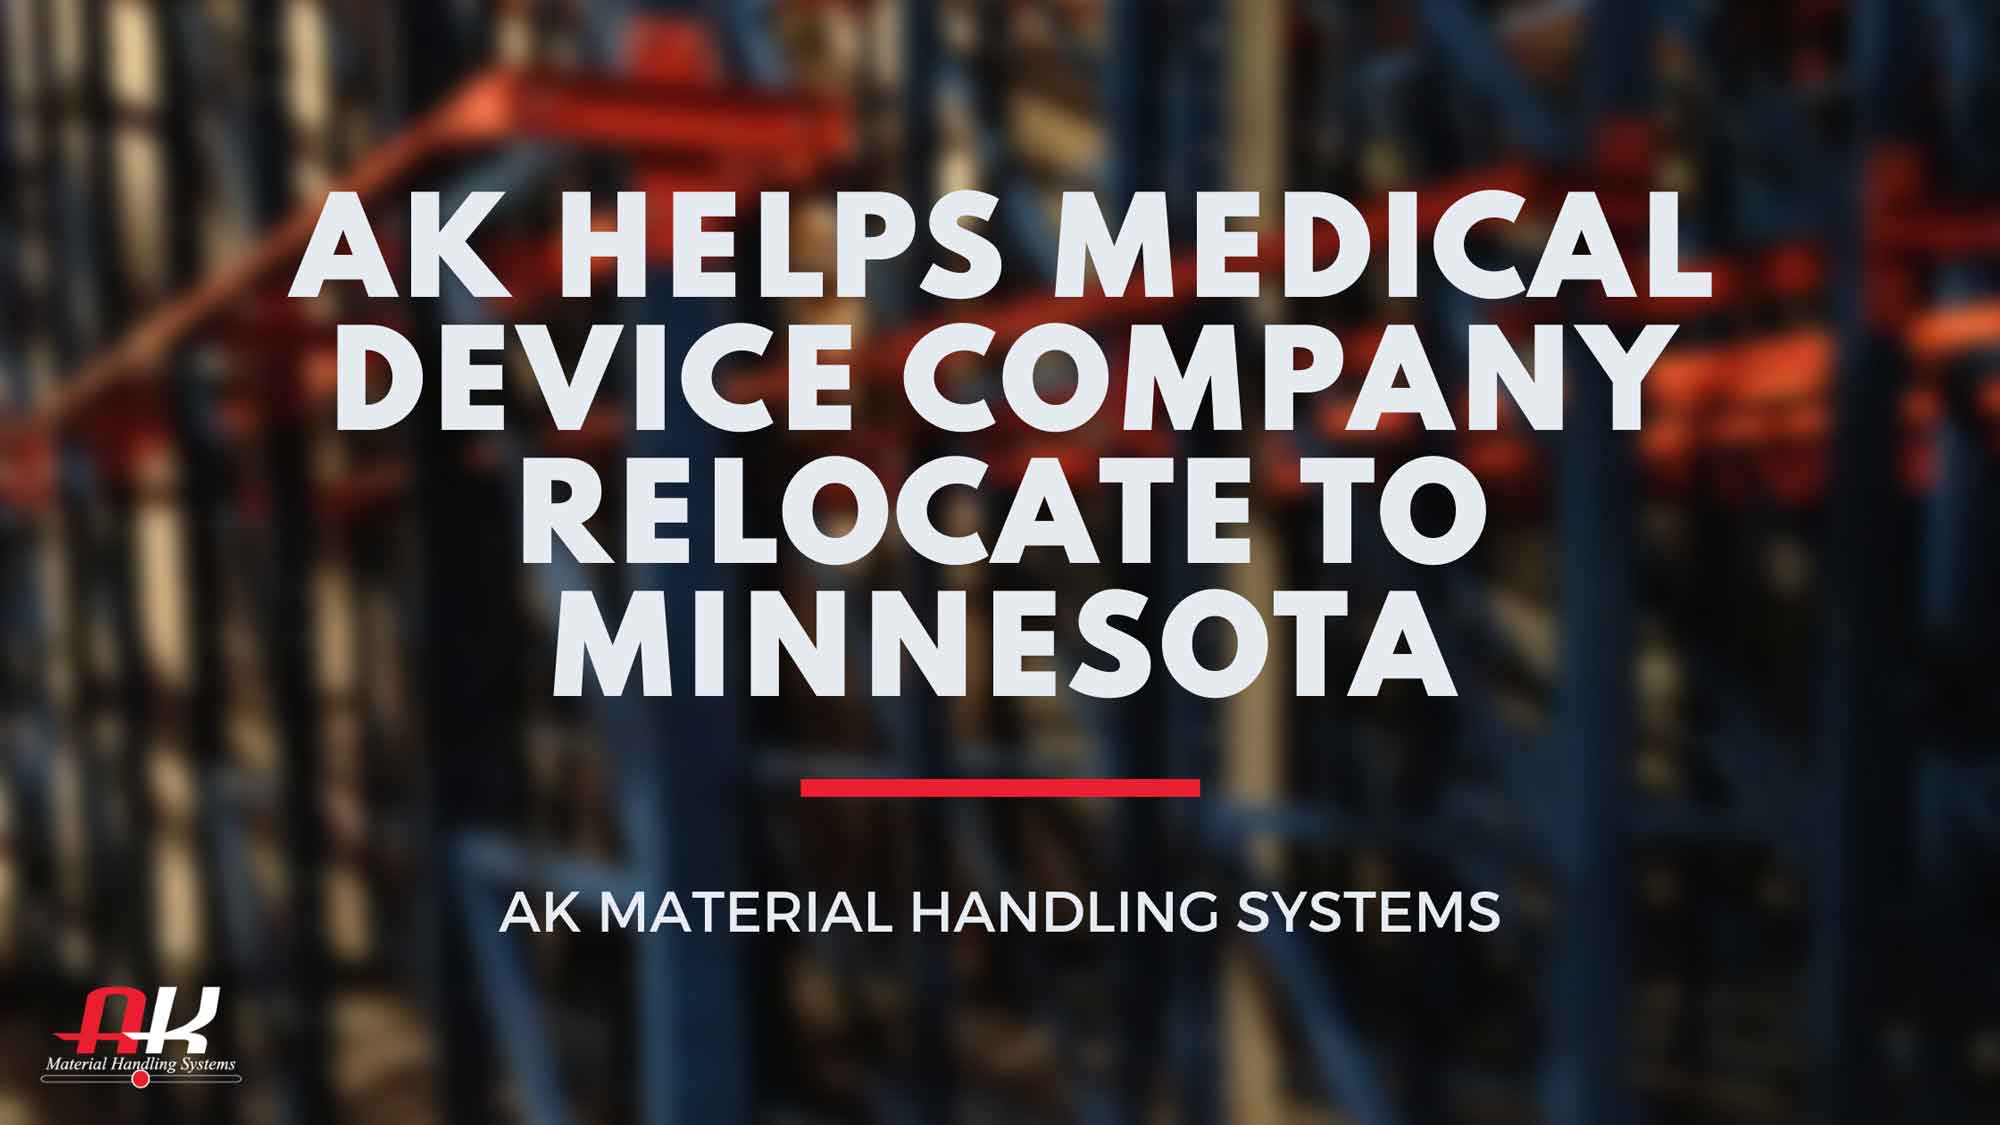 AK helps medical device company relocate to Minnesota.